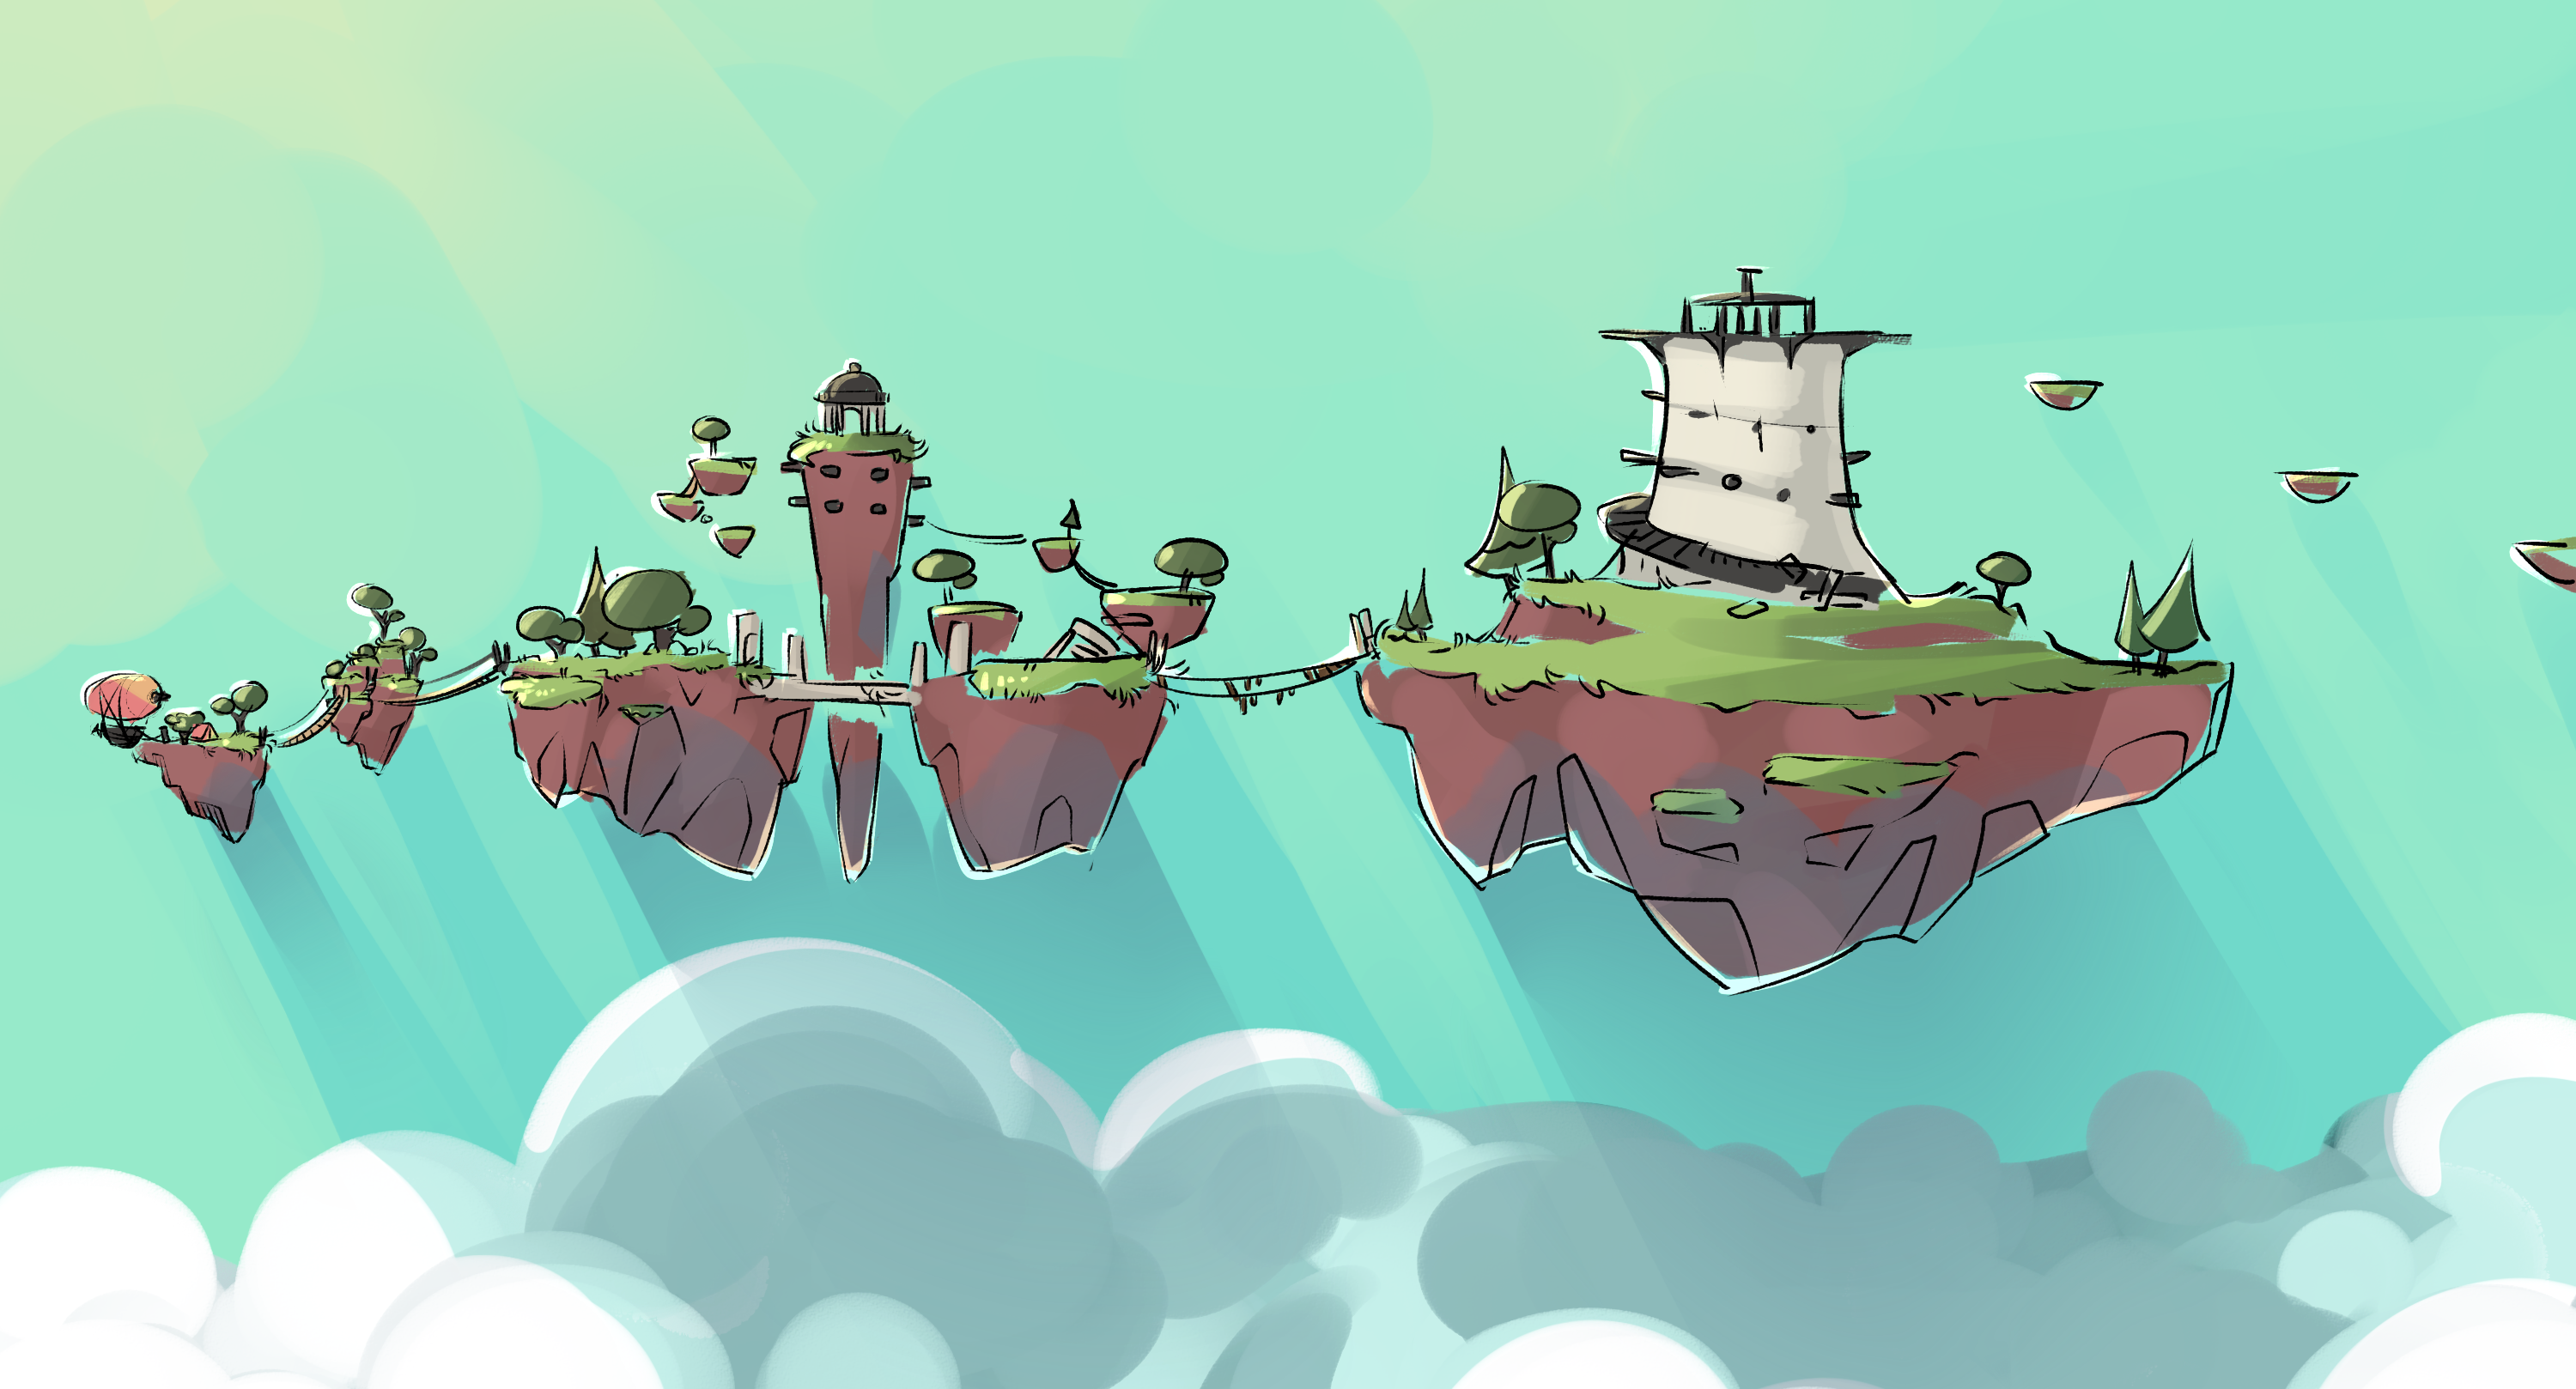 Early Concept Art of the Floating Archipelago. Somewhere high above the clouds, islands of all shapes and sizes are waiting to be explored.